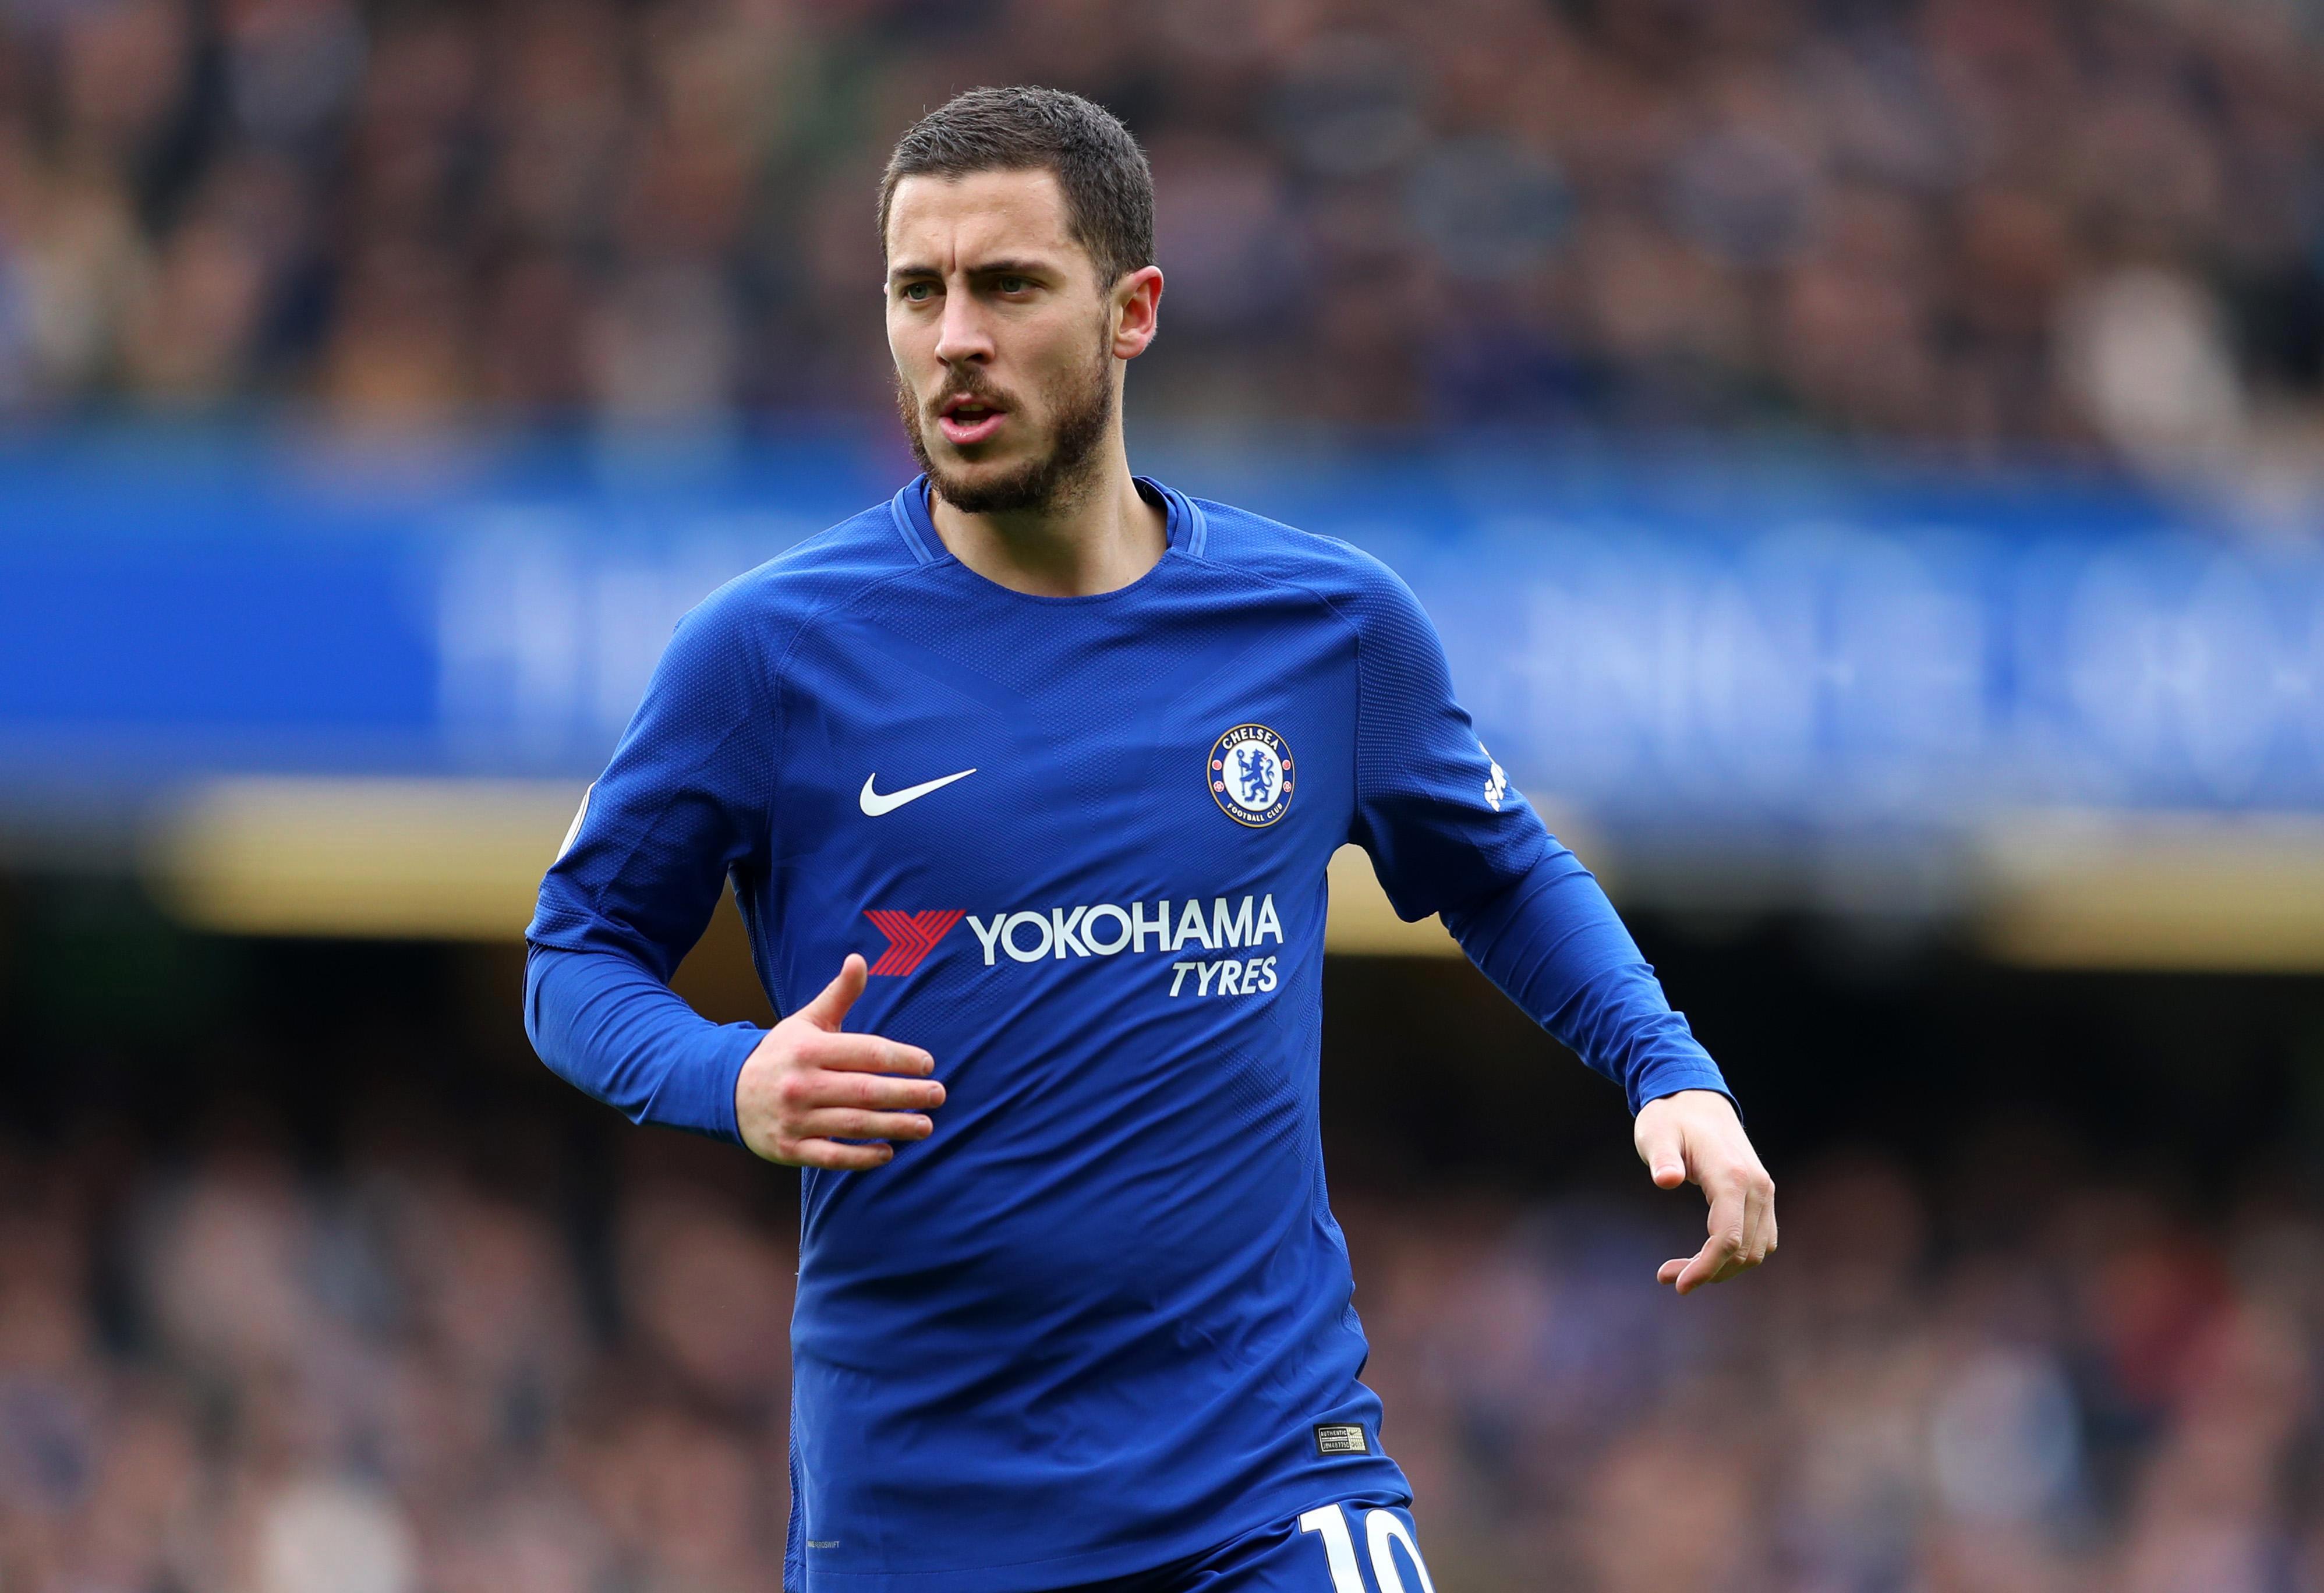 Chelsea to offer Eden Hazard huge £300,000-a-week contract to keep him from Real Madrid